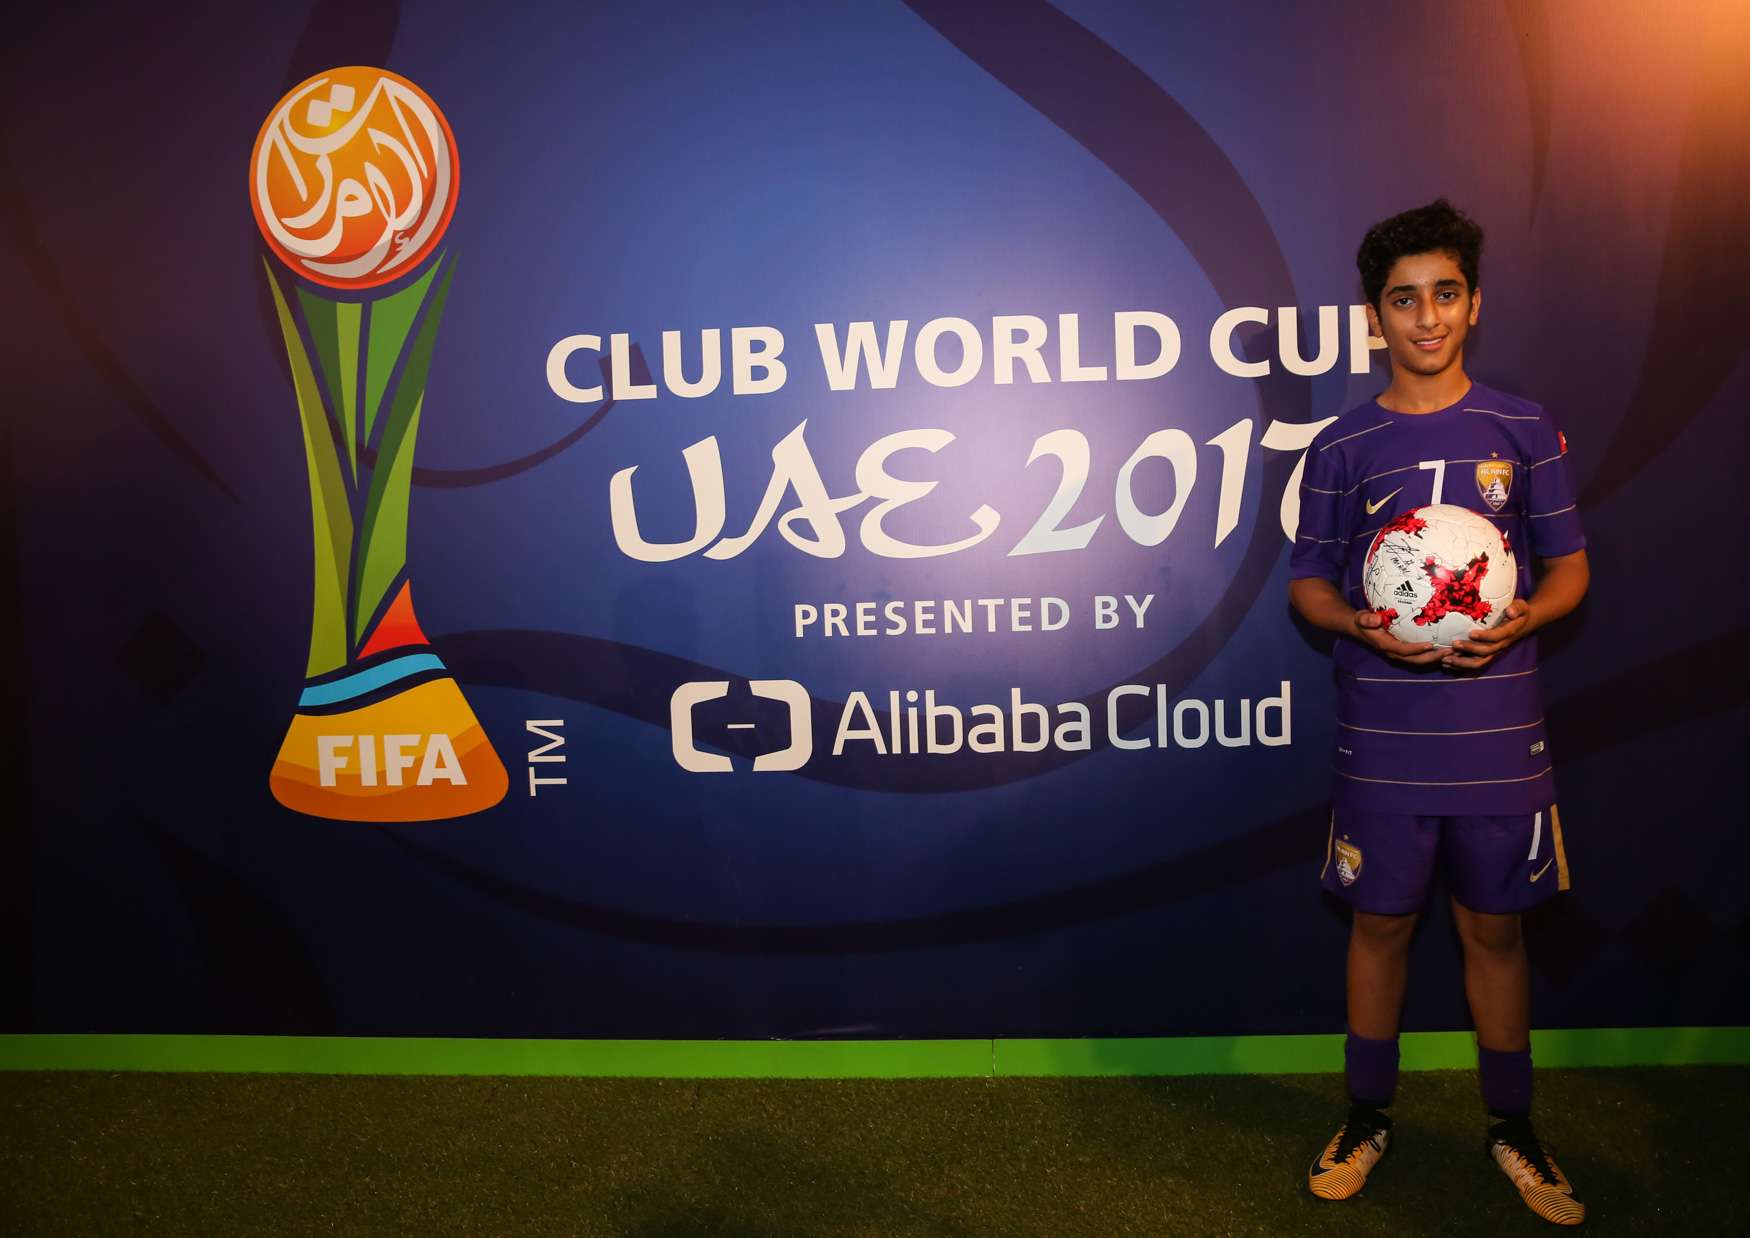 Club World Cup competition winner